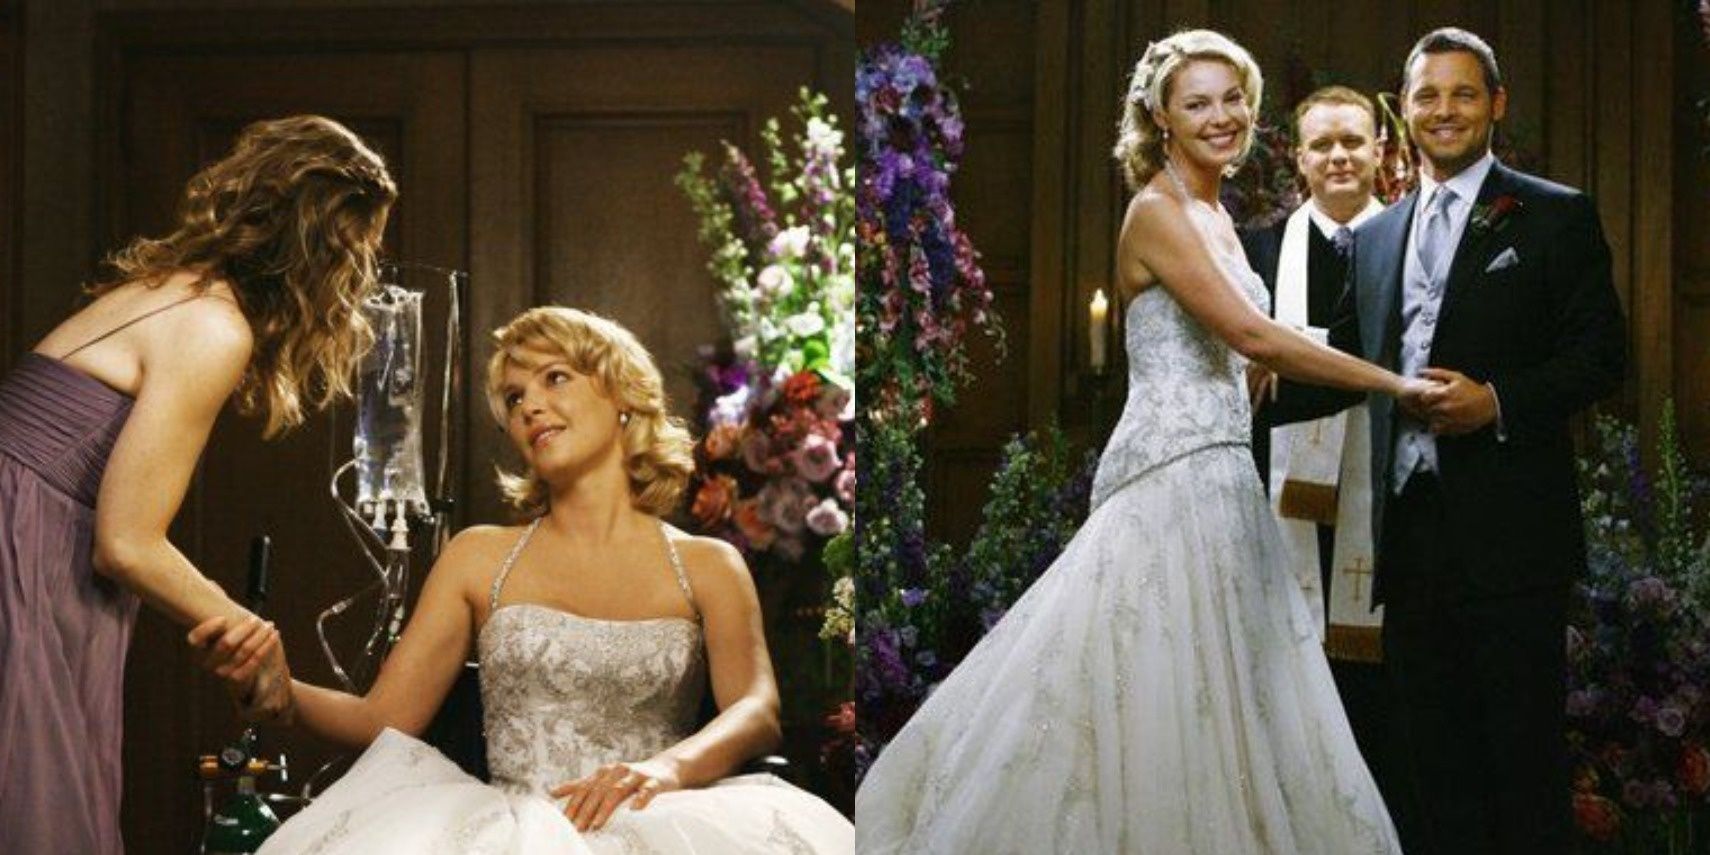 Izzie Stevens (Katherine Heigl) and Meredith Grey (Ellen Pompeo) smiling at each other; Izzie and Alex Karev (Justin Chambers) at their wedding in &quot;Grey's Anatomy.&quot;